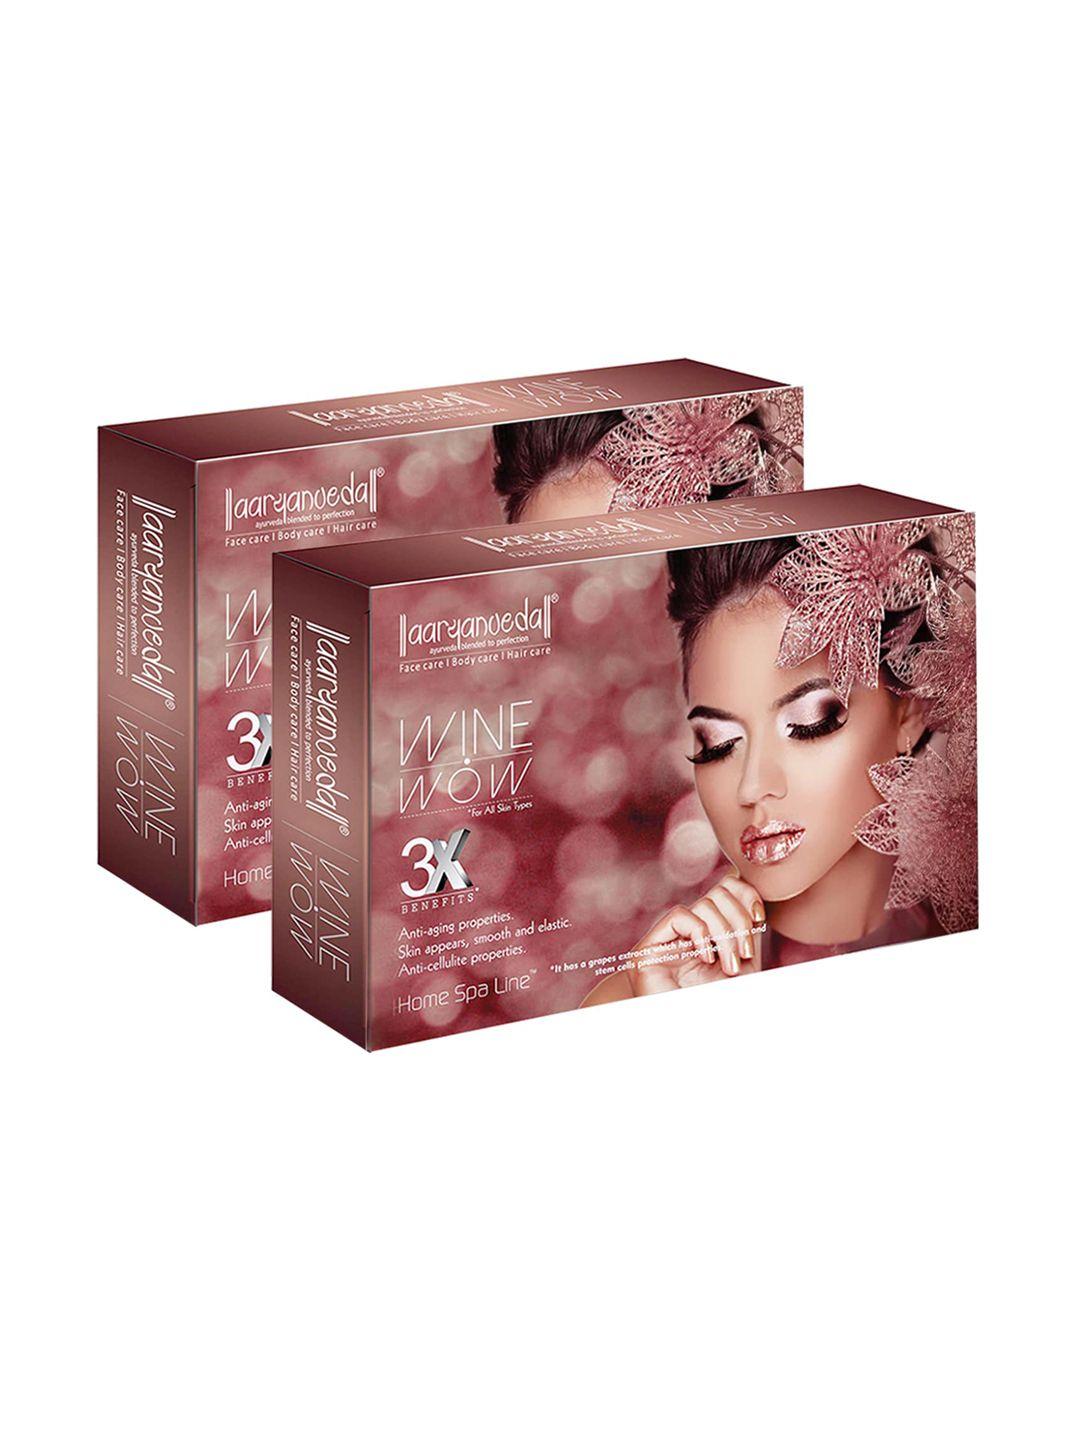 aryanveda set of 2 wine facial spa kit for helps improve complexion & repair sun- damaged cell -55g